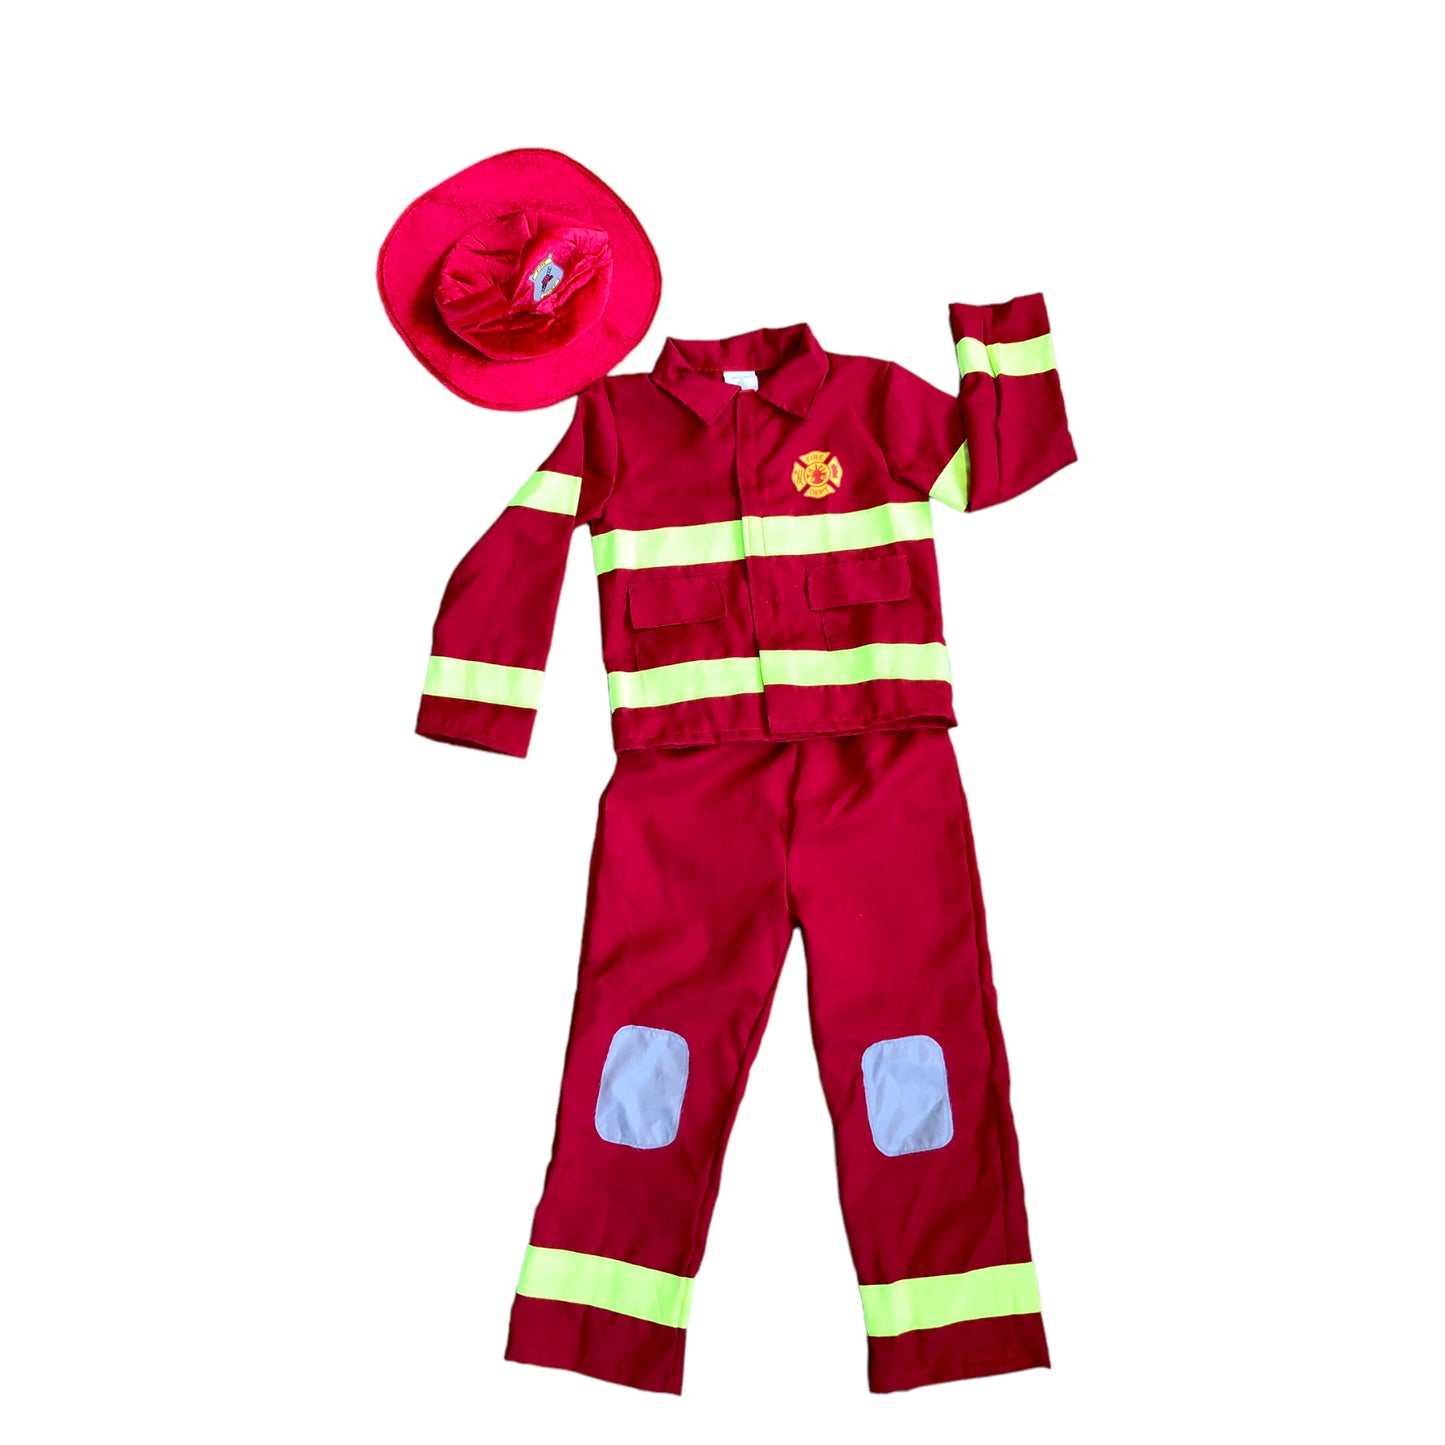 Firefighter Costume Set (7/8 years old, 128cm)